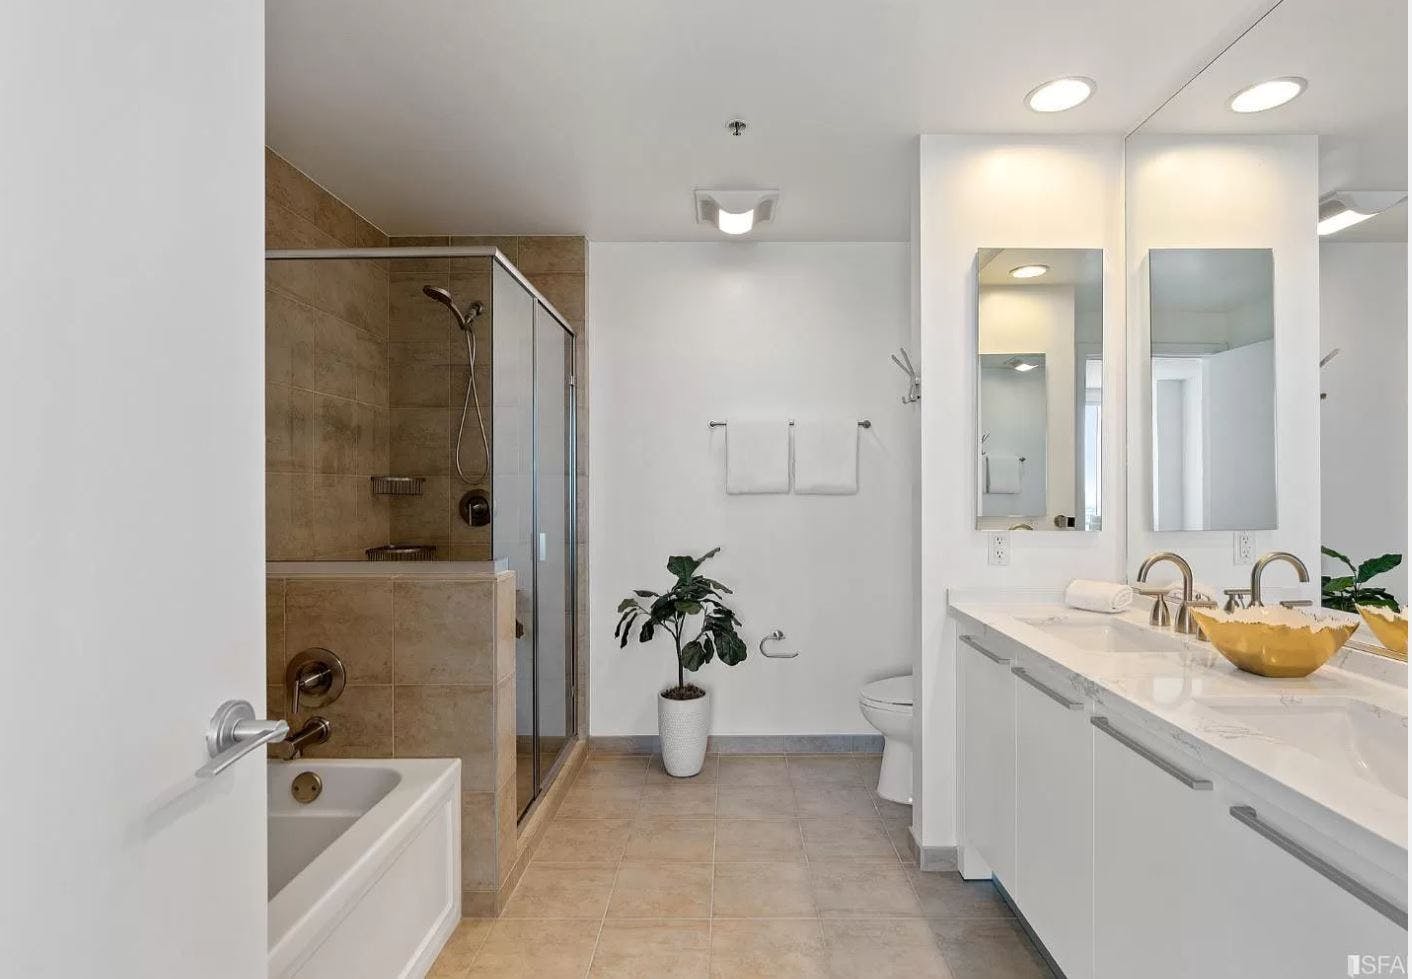 The bathrooms flaunt marble countertops and tile flooring, speaking to an exquisite, finer taste in life. 